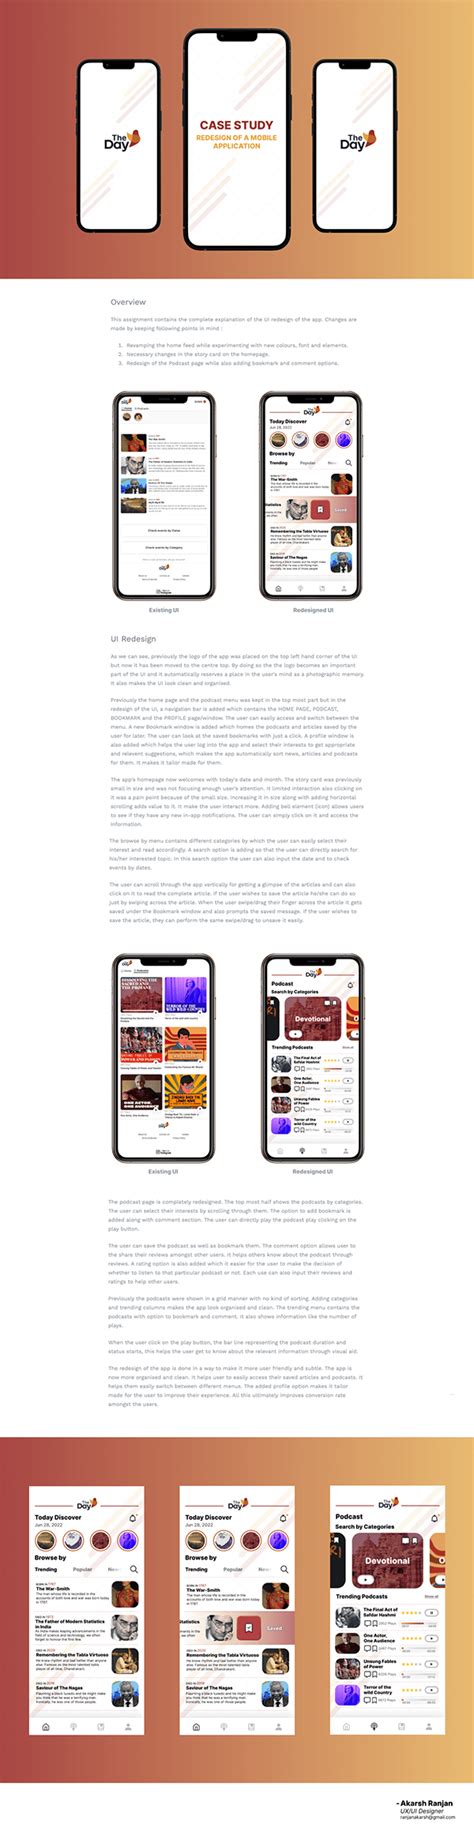 Case Study Redesign Of A Mobile Application On Behance